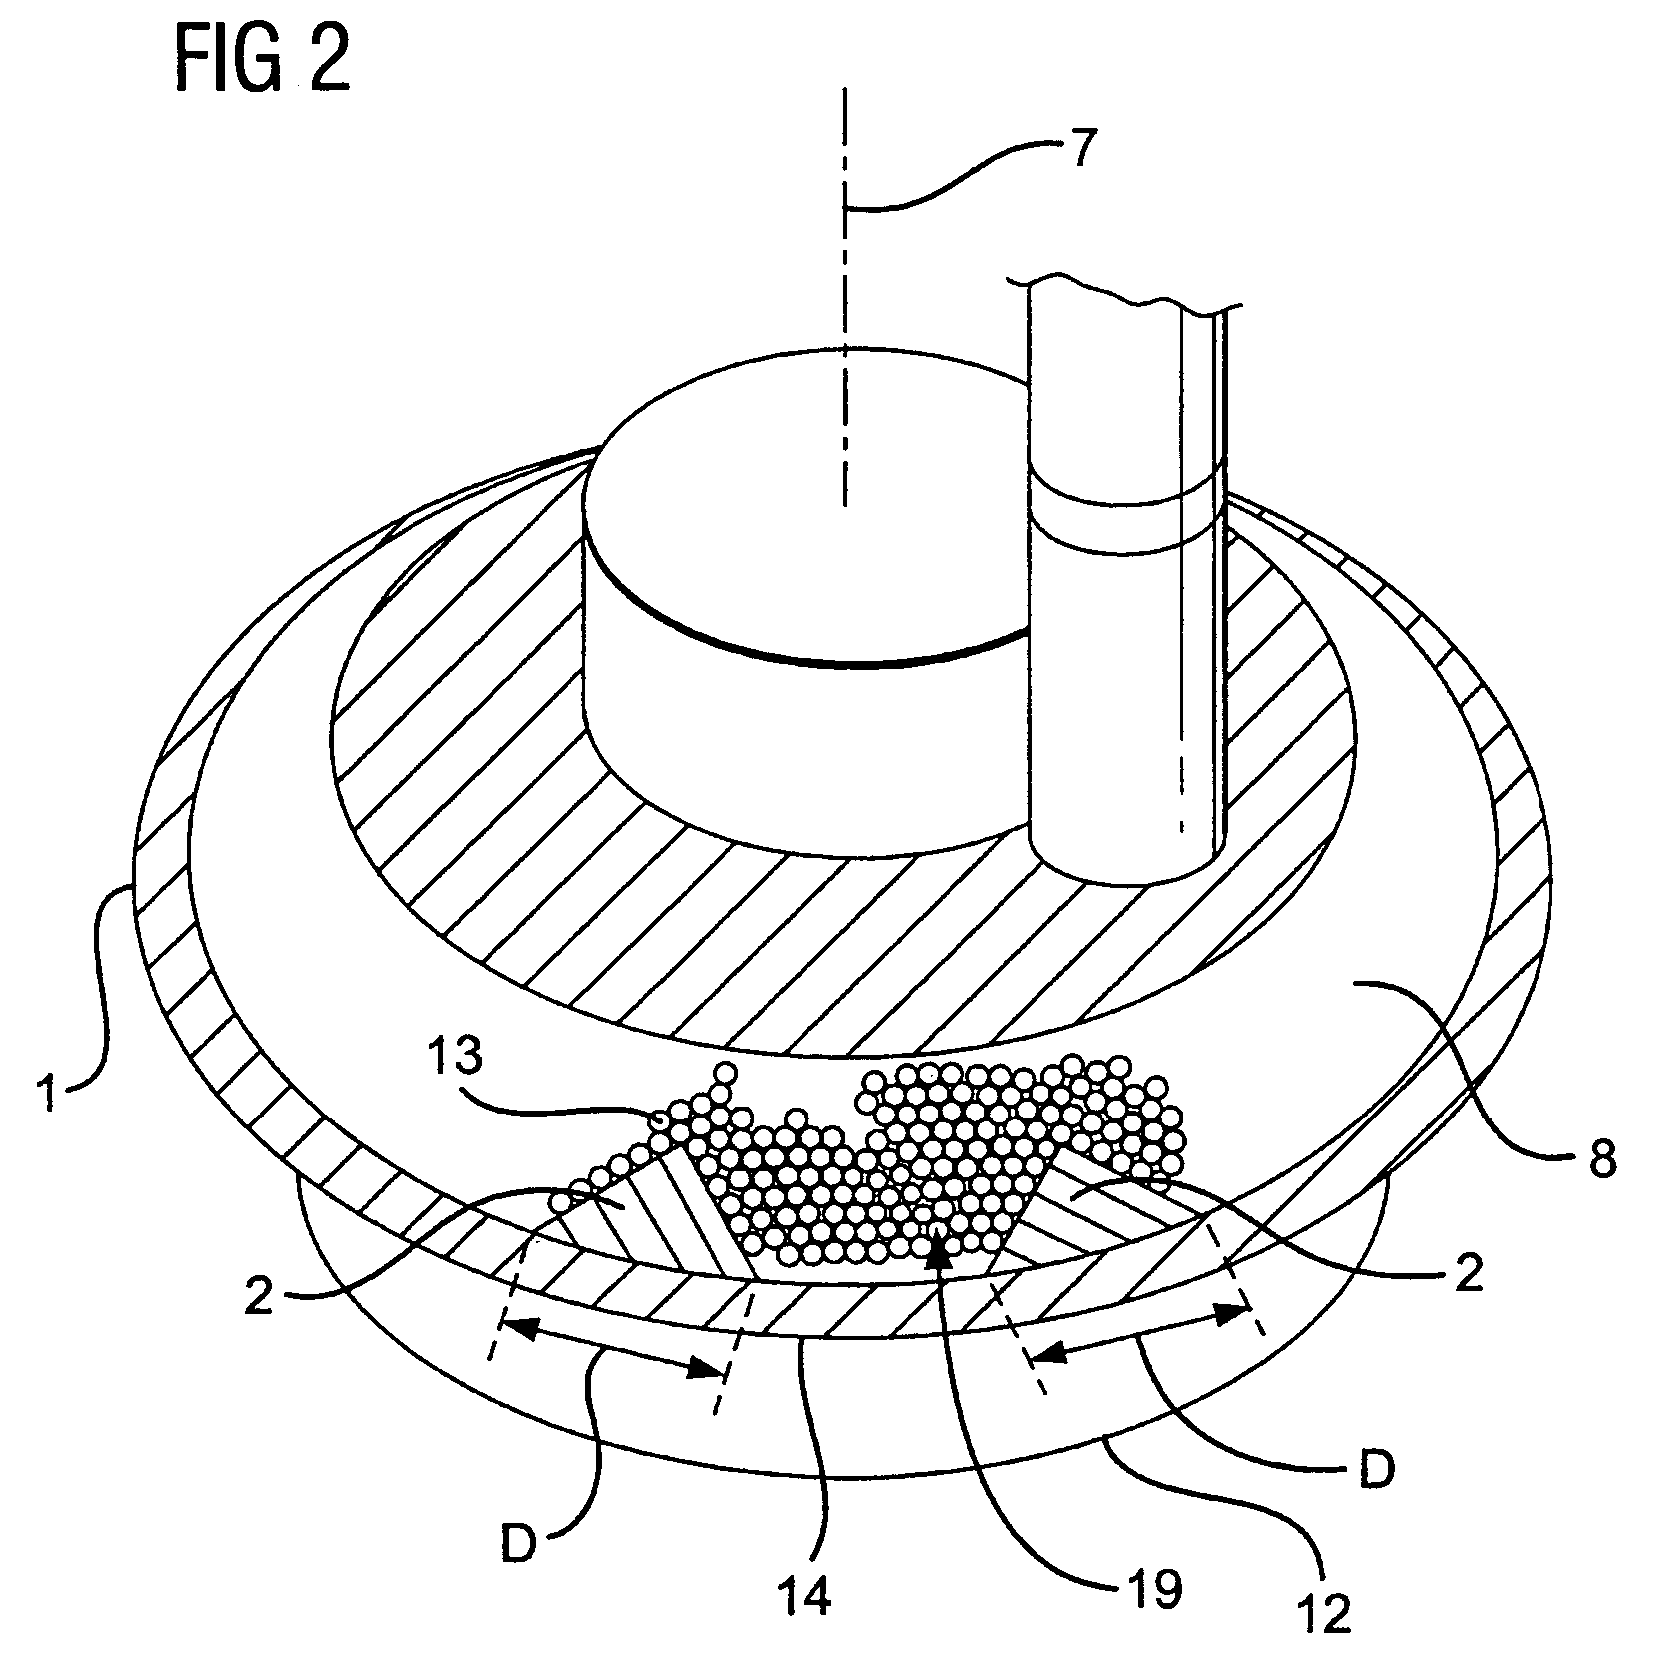 Burner apparatus for burning fuel and air